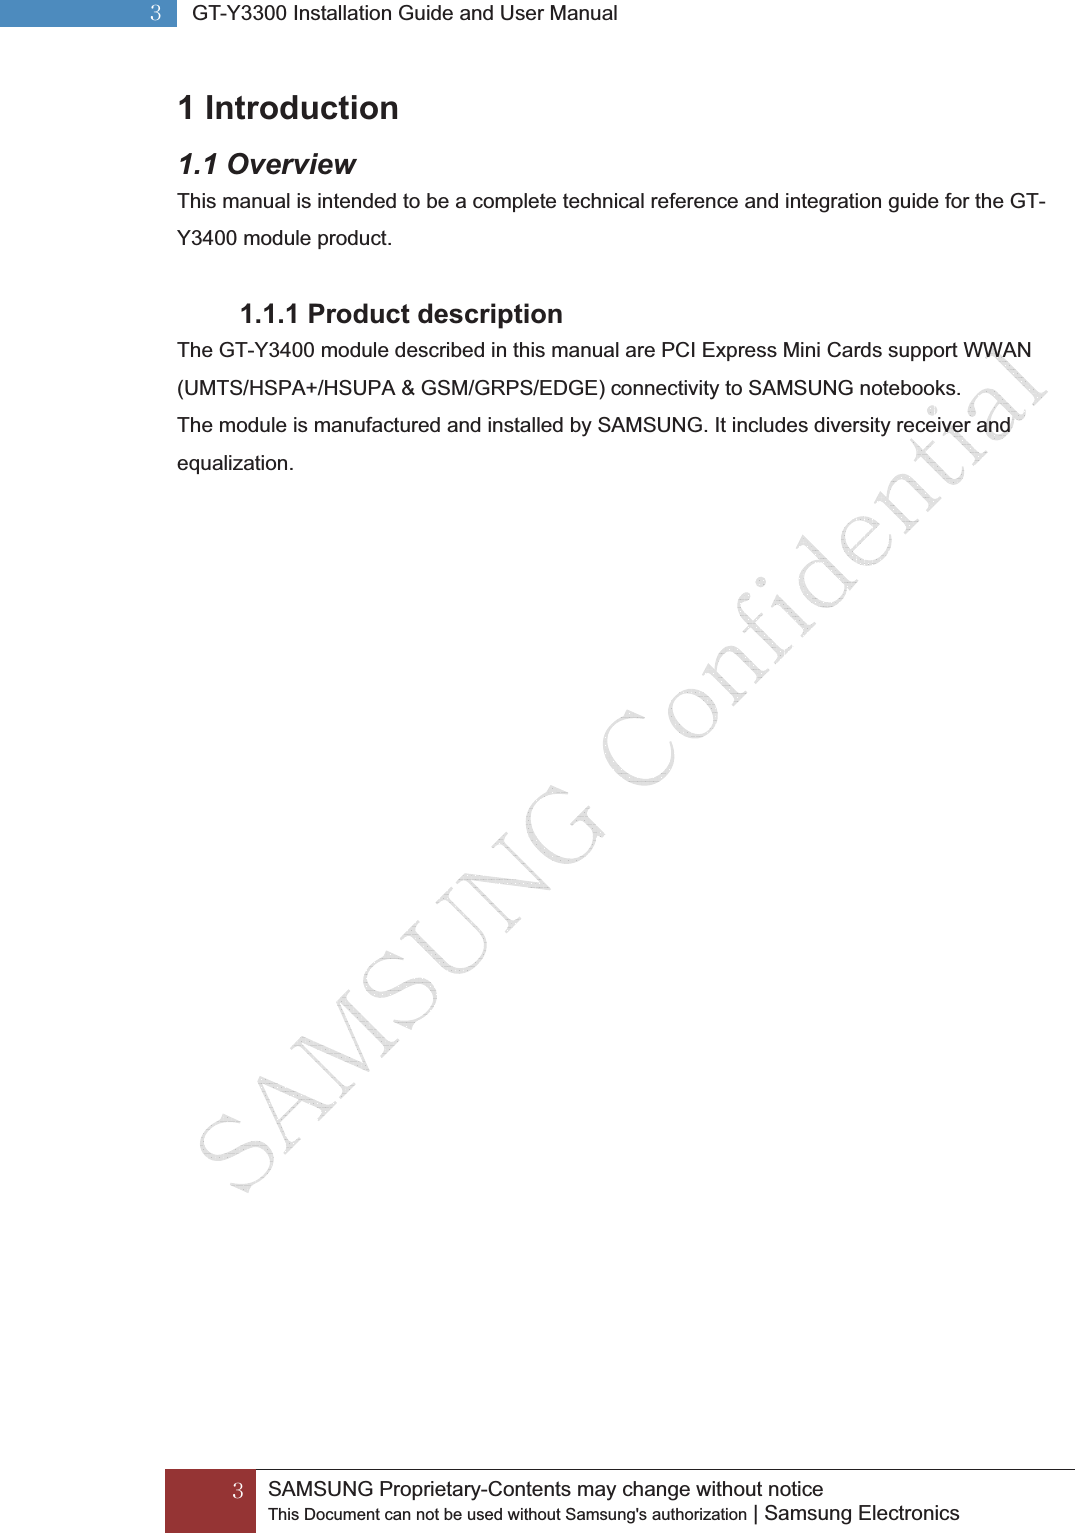 GZGGSAMSUNG Proprietary-Contents may change without notice This Document can not be used without Samsung&apos;s authorization | Samsung Electronics GZG GT-Y3300 Installation Guide and User ManualG1 Introduction 1.1 Overview This manual is intended to be a complete technical reference and integration guide for the GT-Y3400 module product. 1.1.1 Product description The GT-Y3400 module described in this manual are PCI Express Mini Cards support WWAN (UMTS/HSPA+/HSUPA &amp; GSM/GRPS/EDGE) connectivity to SAMSUNG notebooks. The module is manufactured and installed by SAMSUNG. It includes diversity receiver and equalization.   